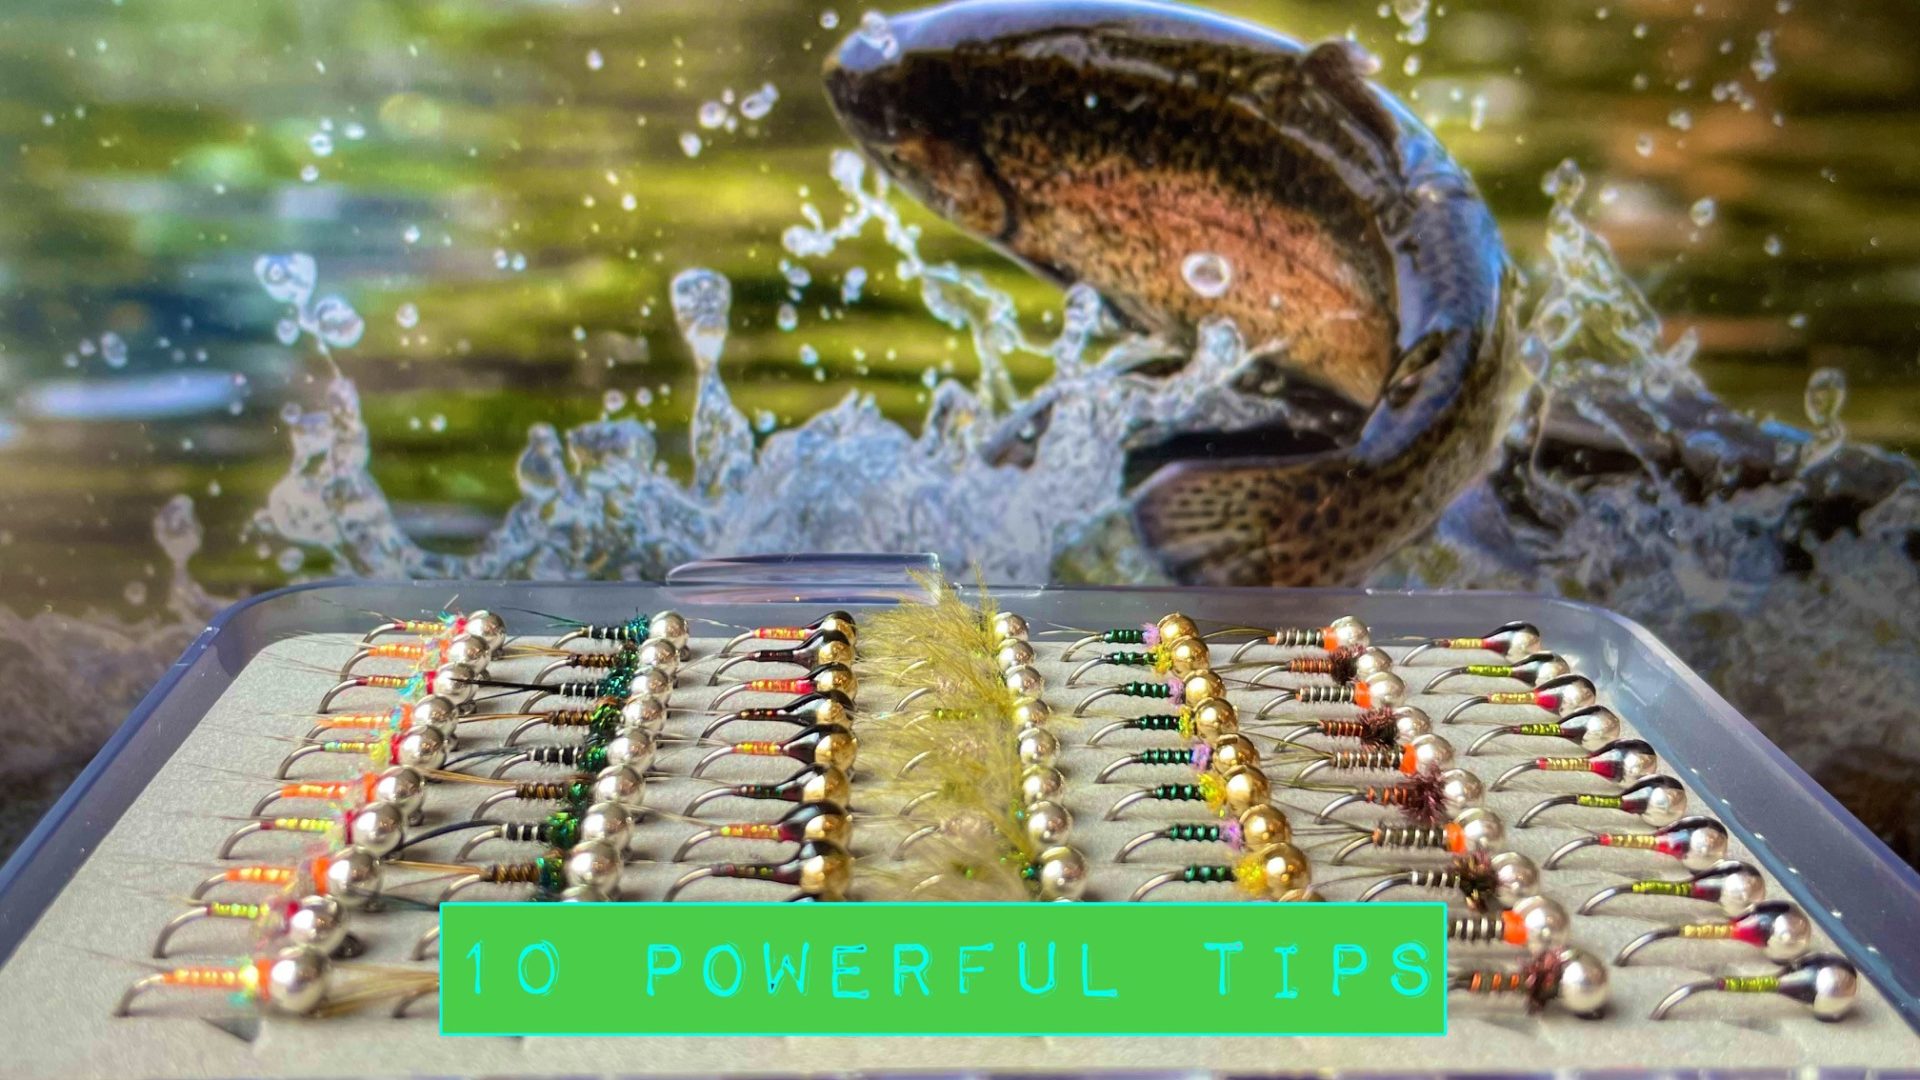 Fly Tying Tips: 10 Powerful Suggestions to Help You Get Started